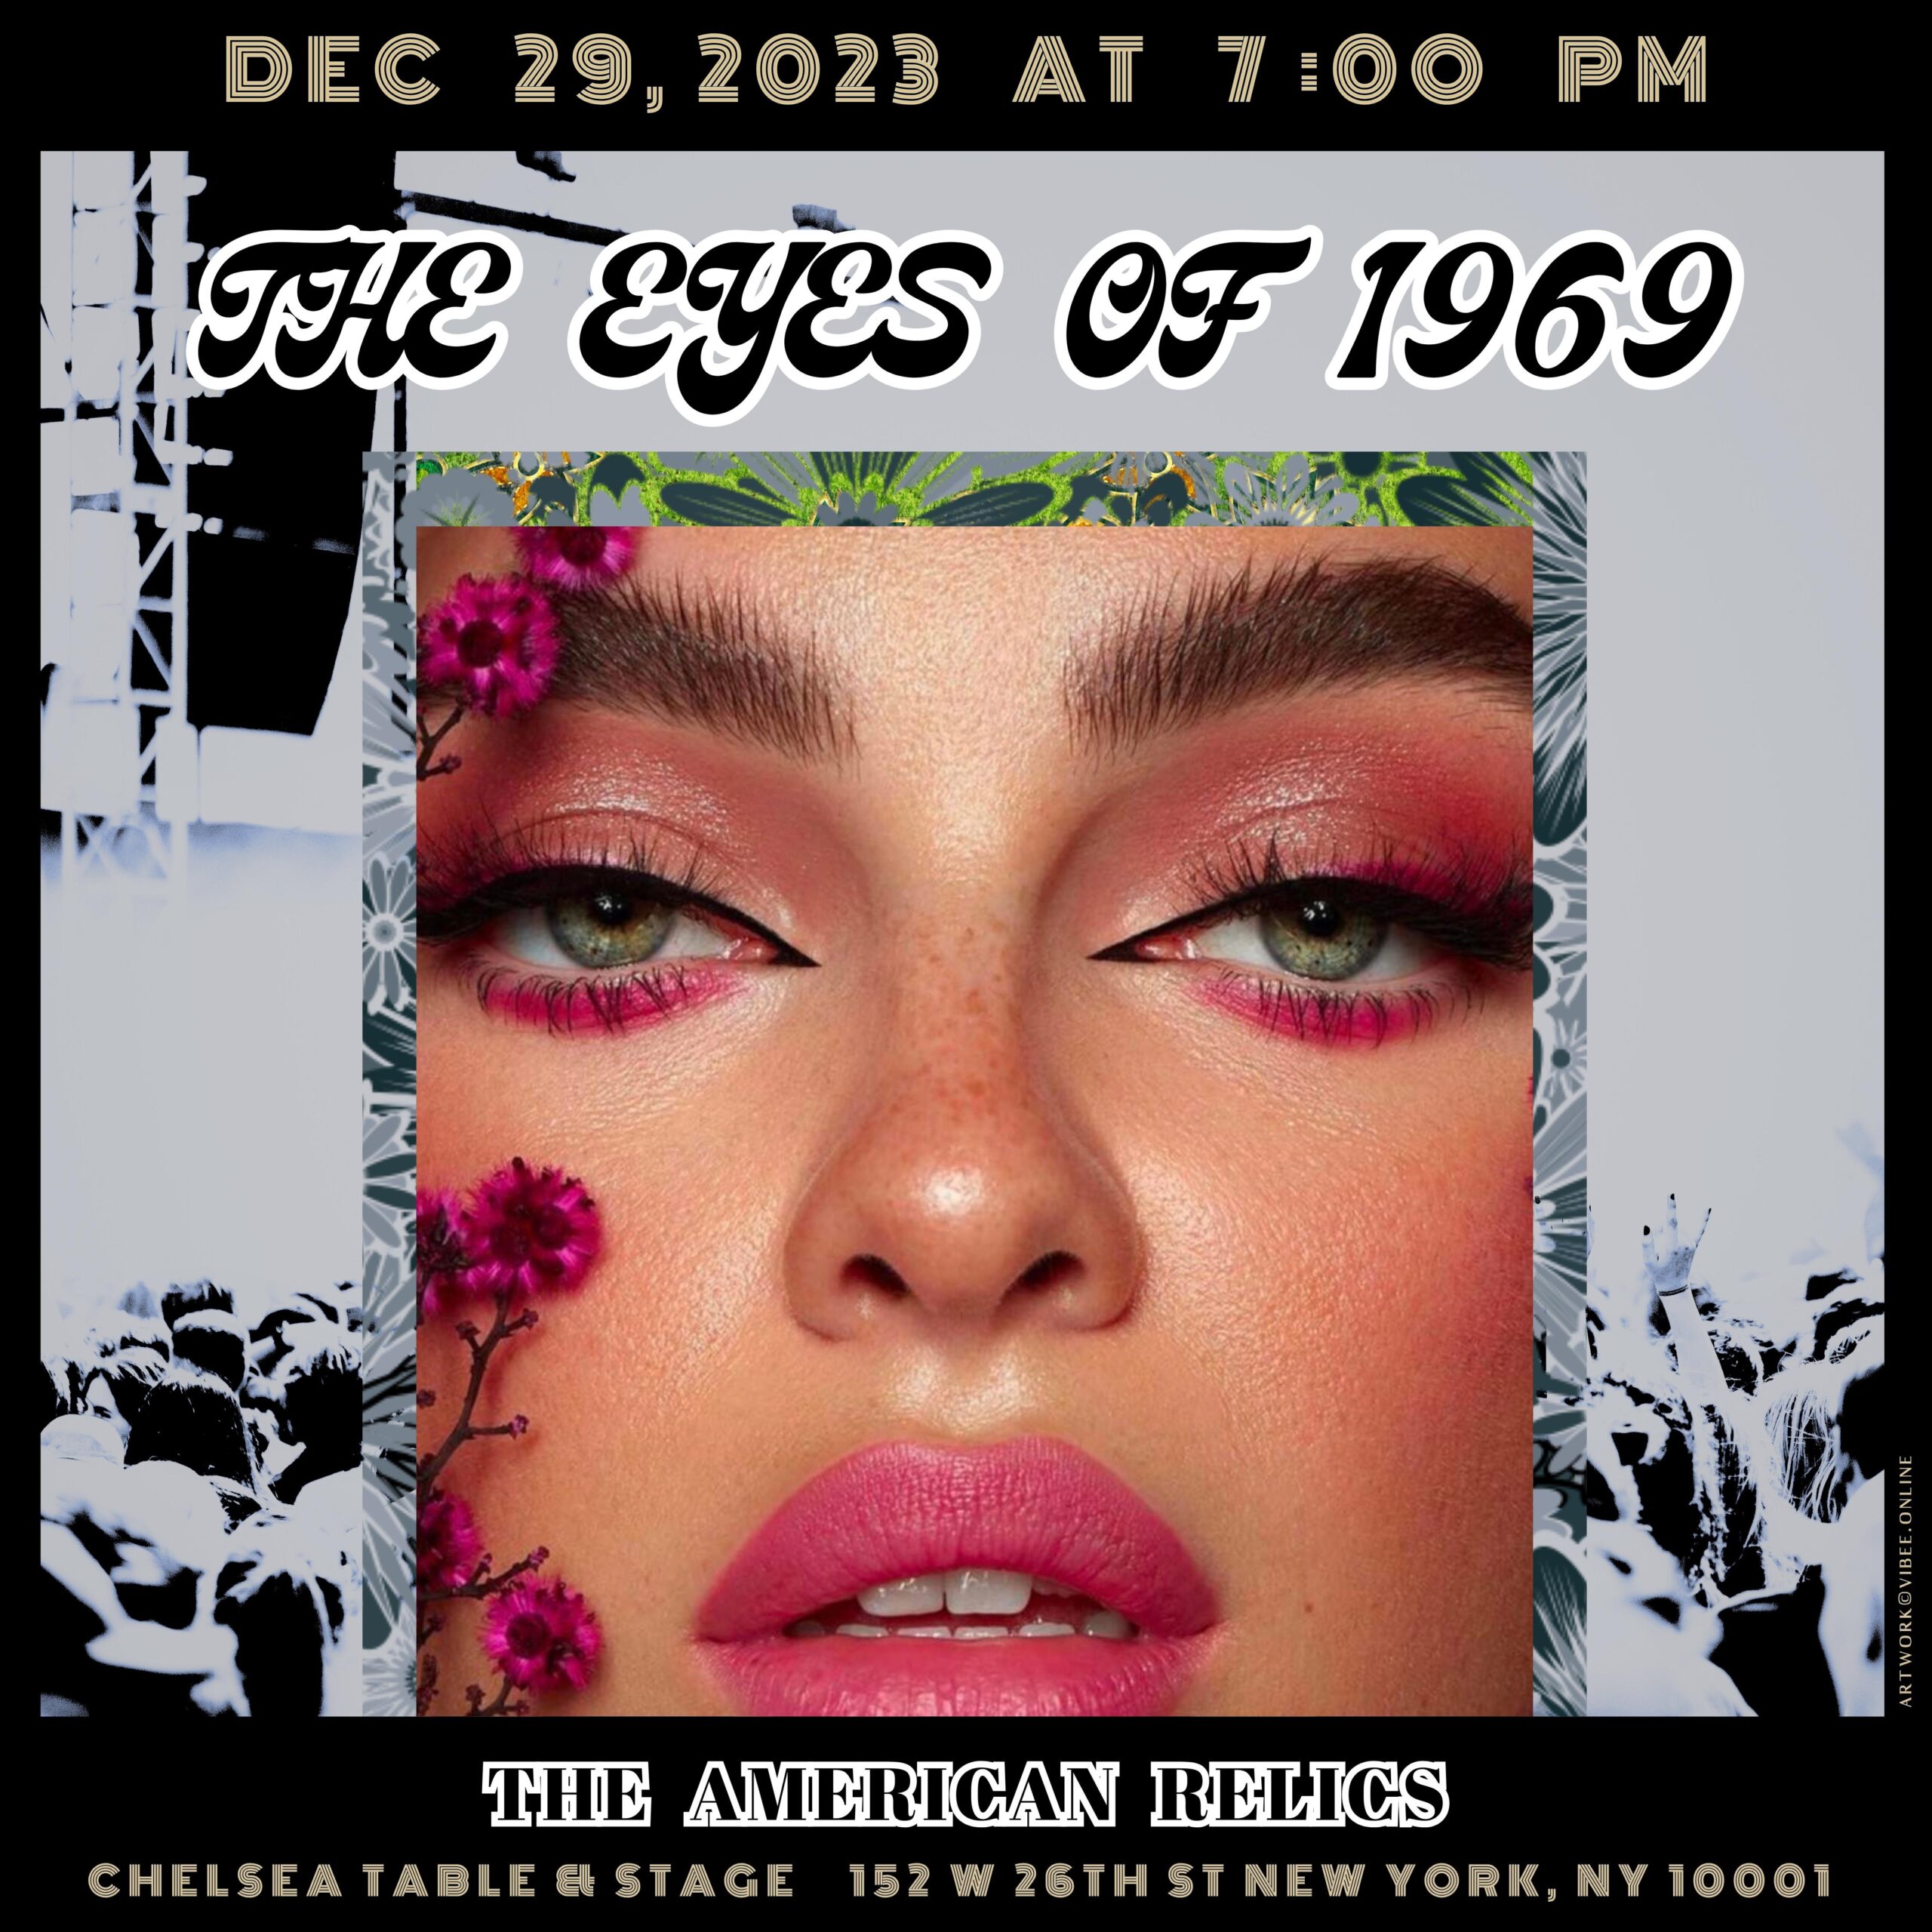 THE AMERICAN RELICS To Perform “The Eyes of 1969” At Chelsea Table & Stage In NYC 12/29/23 7:00 PM